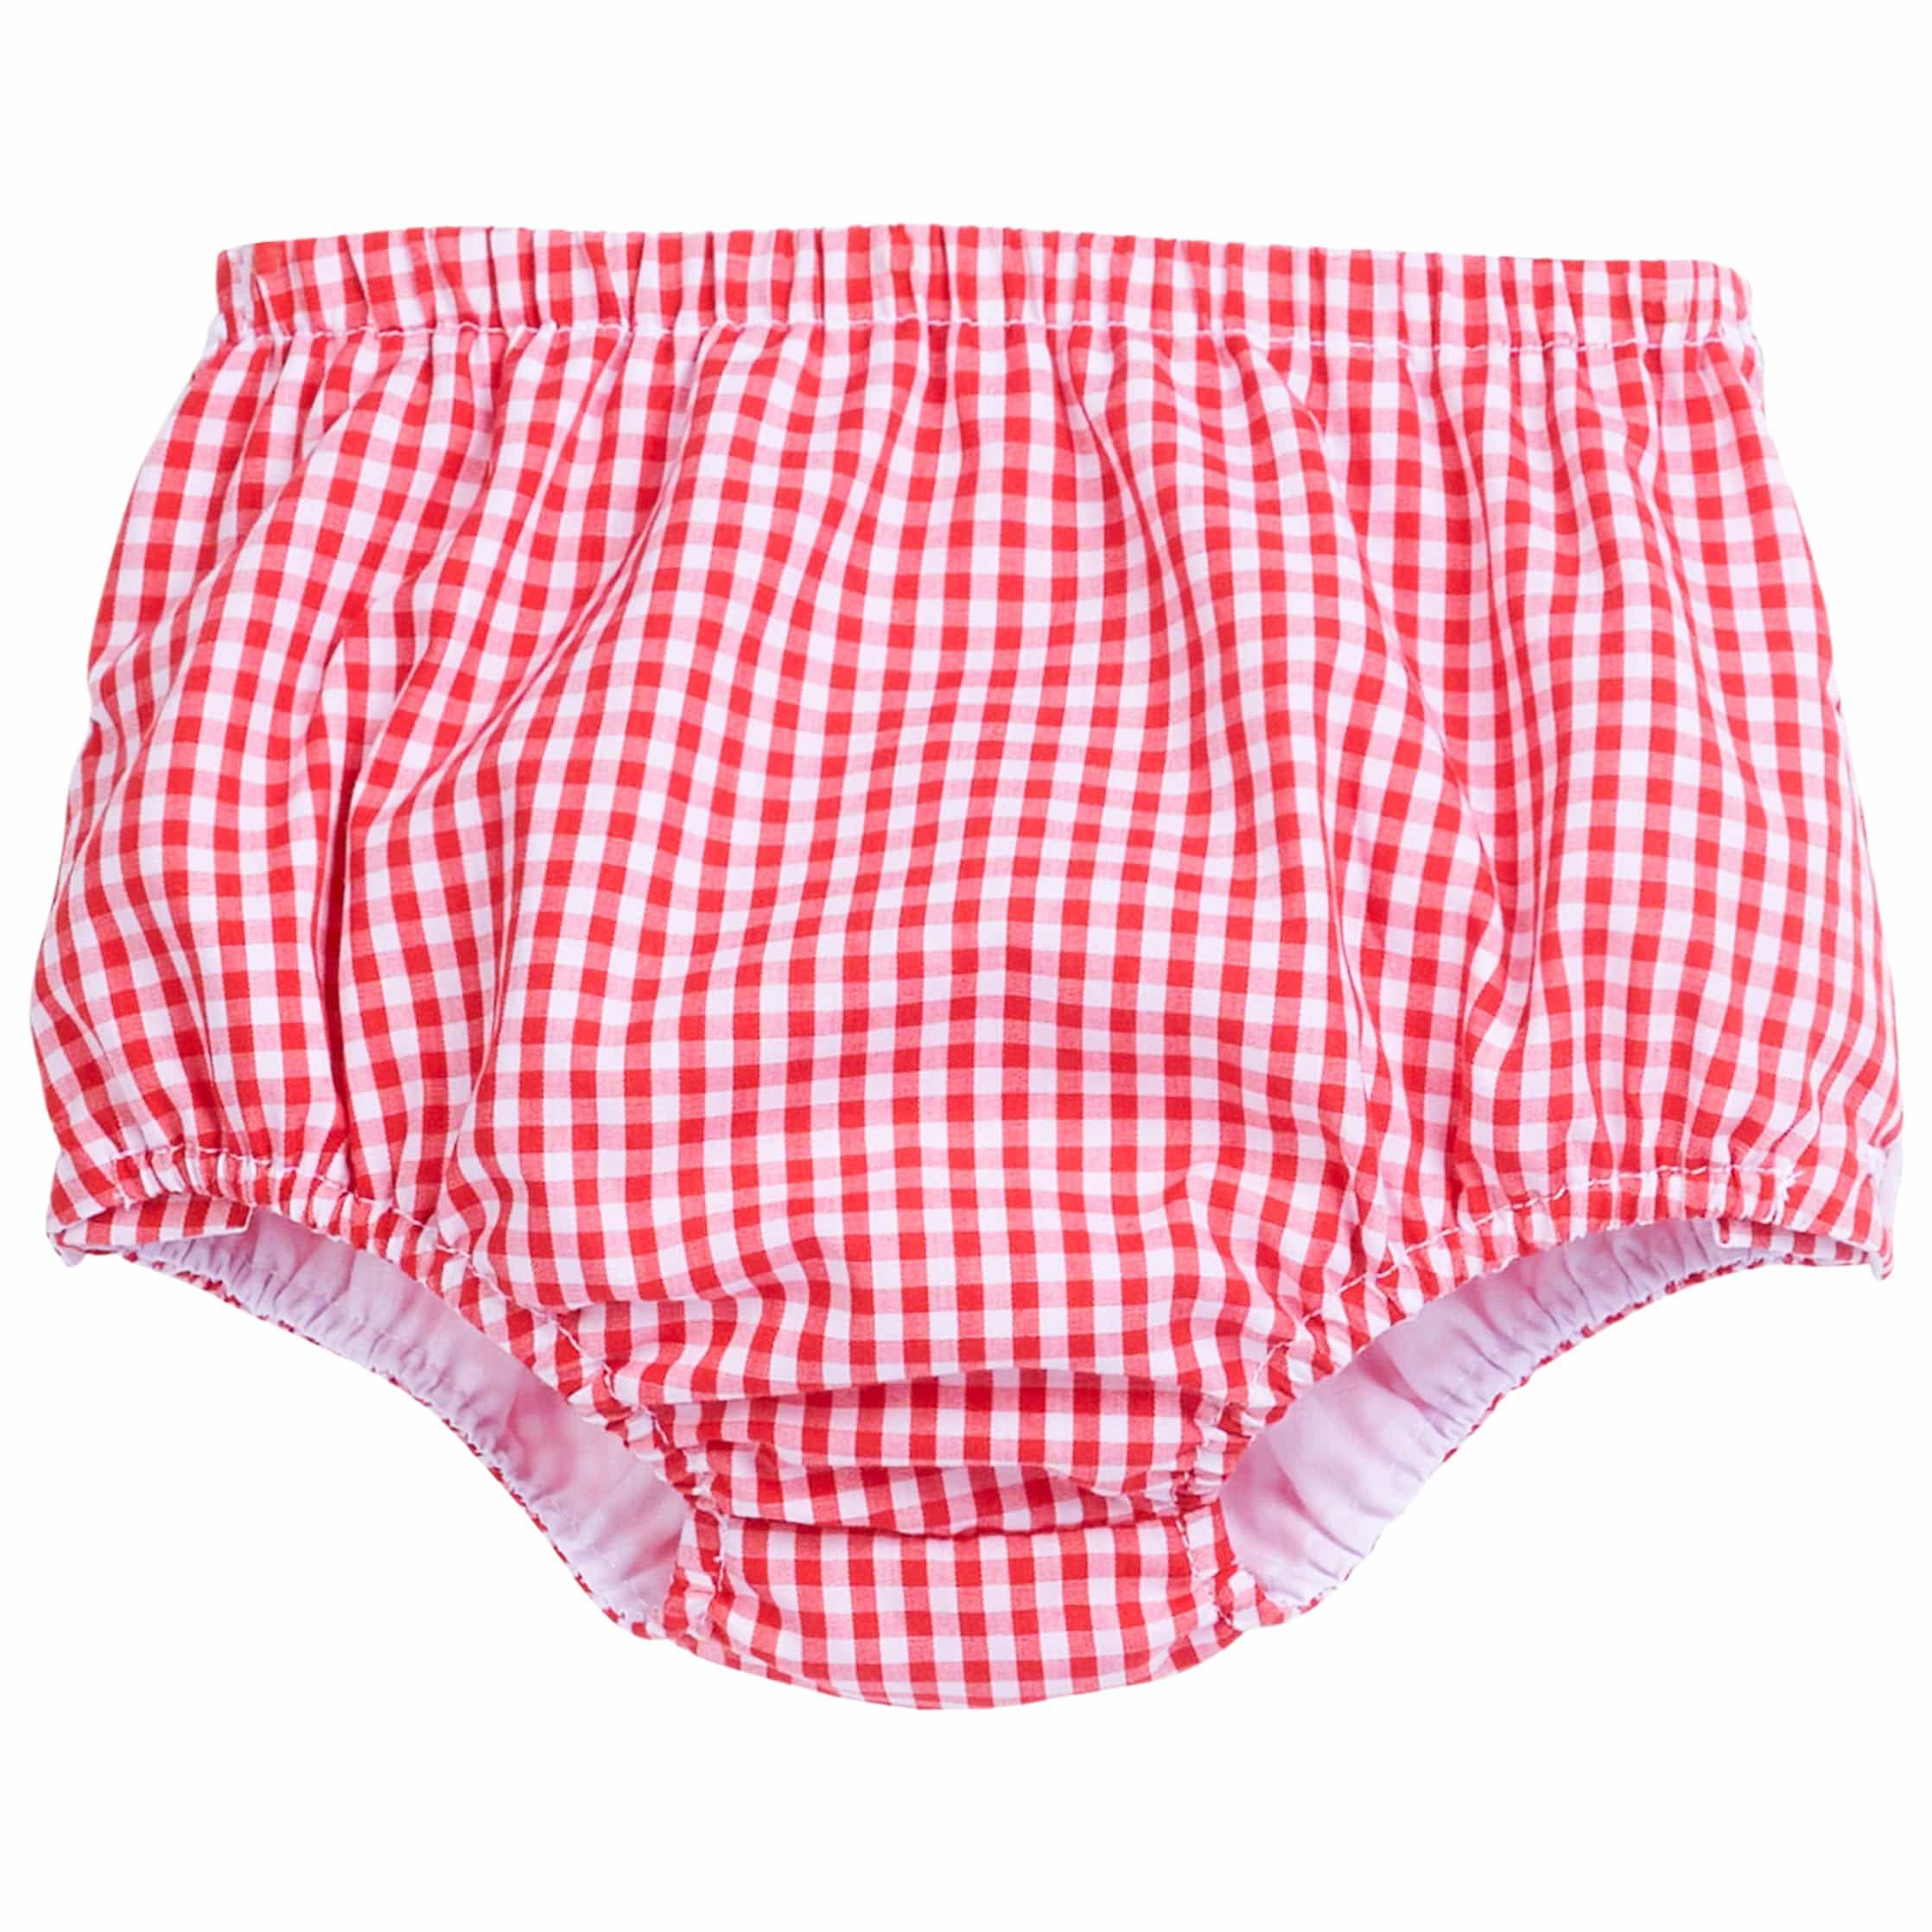 Jam Panty - Red Gingham | Little English